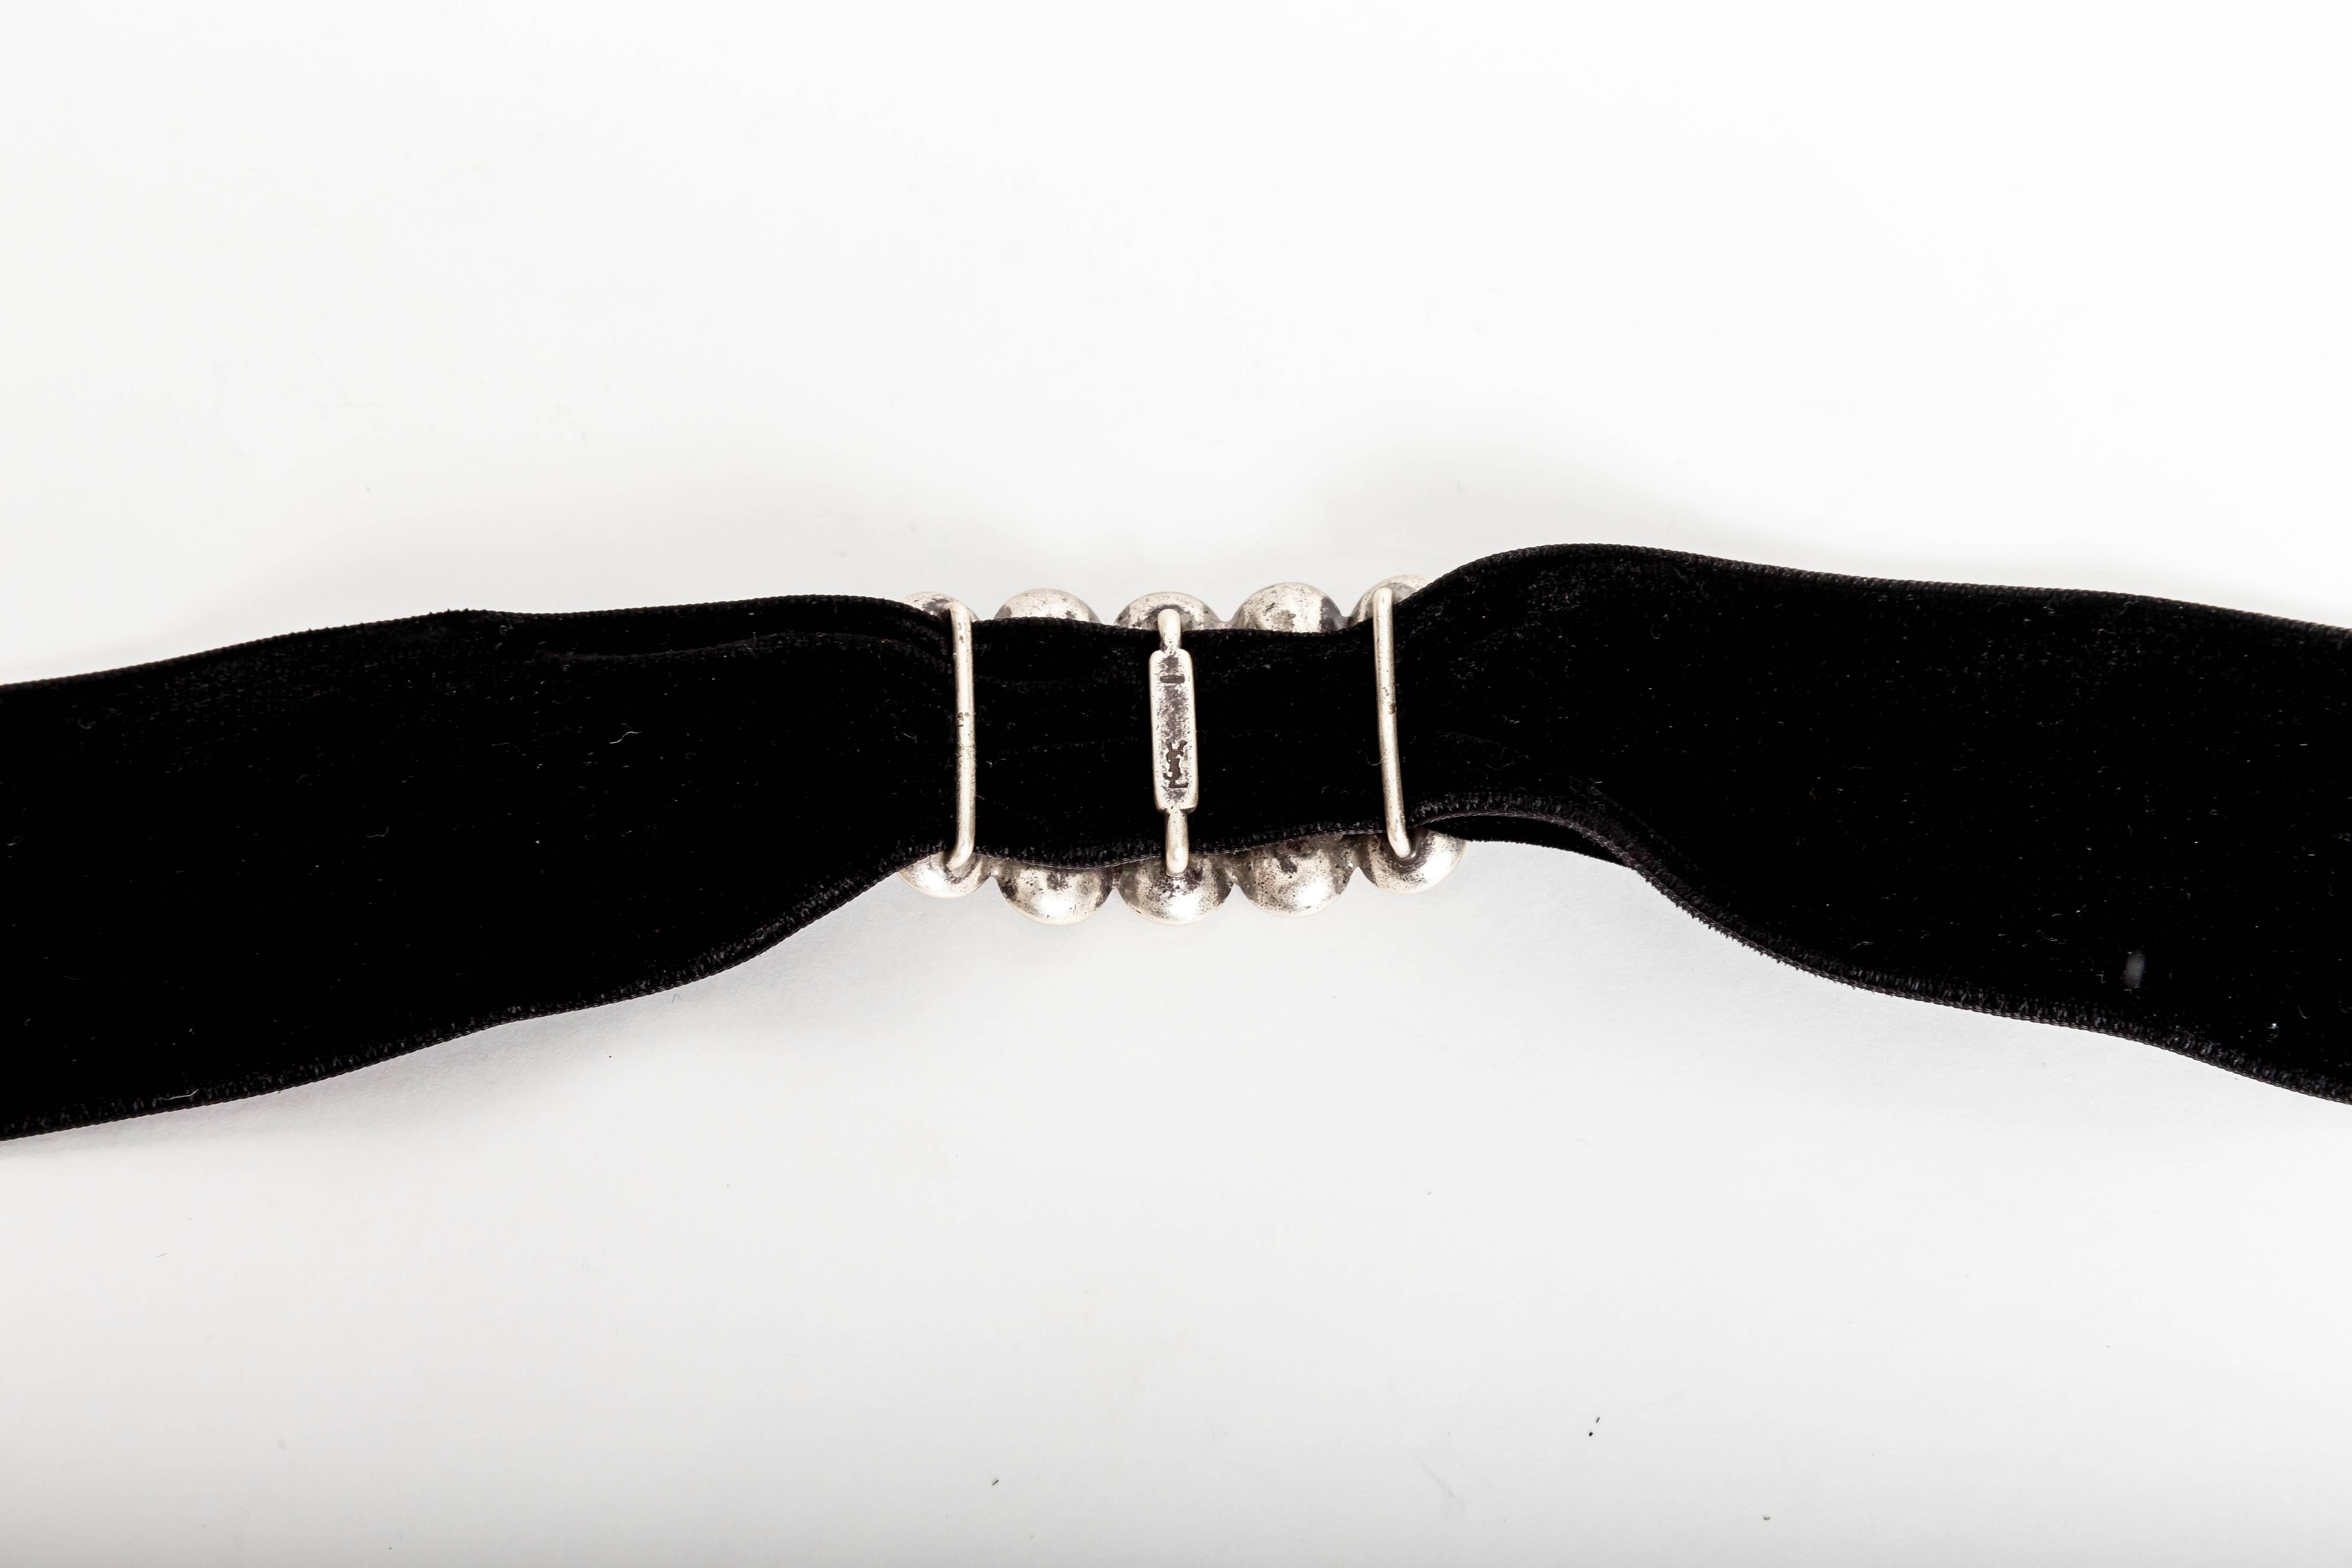 Sensational crystal YSL choker on velvet band.
May also be worn as a bracelet when wrapped several times around the wrist.
Ribbon measures 2 inches wide x 27 inches long.
Center piece contains 10 faceted crystals and measures 4 inches long x almost